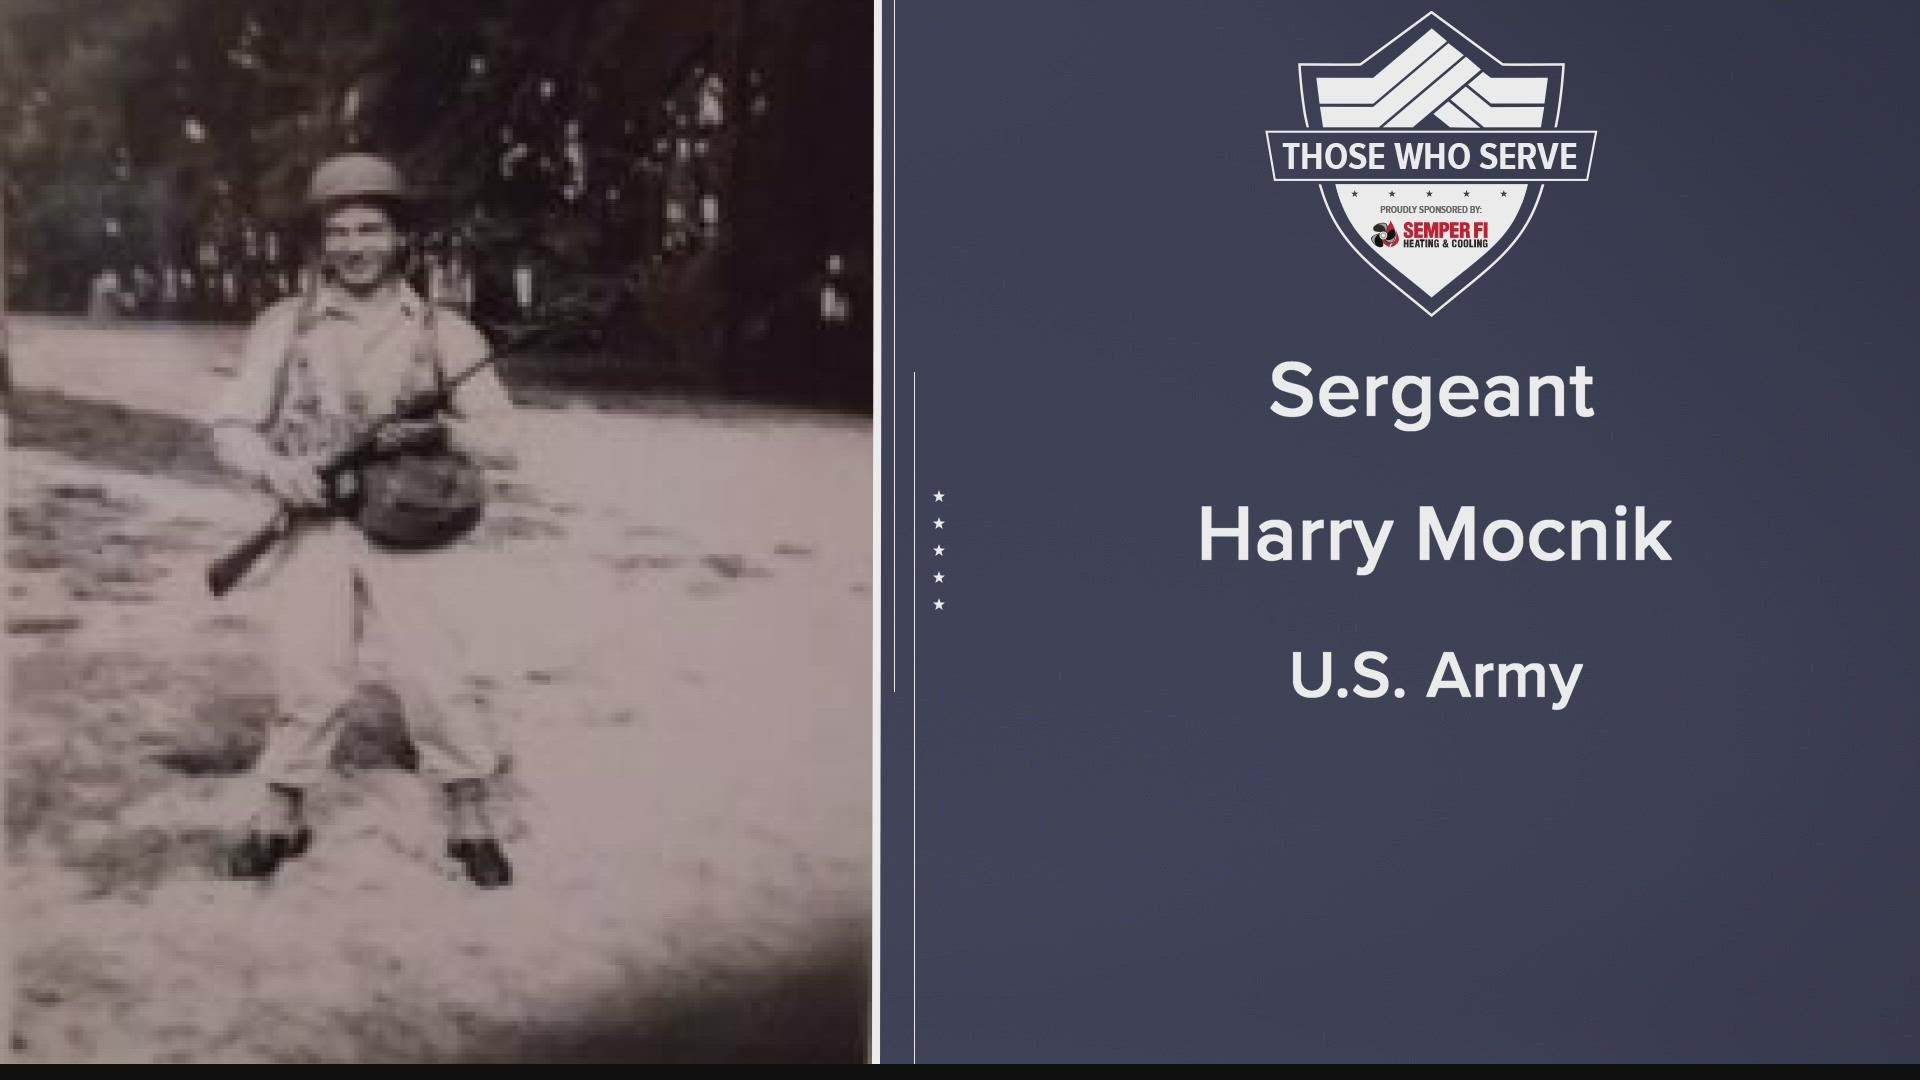 12 News is saluting those who serve. We want to shine the spotlight on Sergeant Harry Mocnik. He earned the rank of sergeant in the U.S. Army.